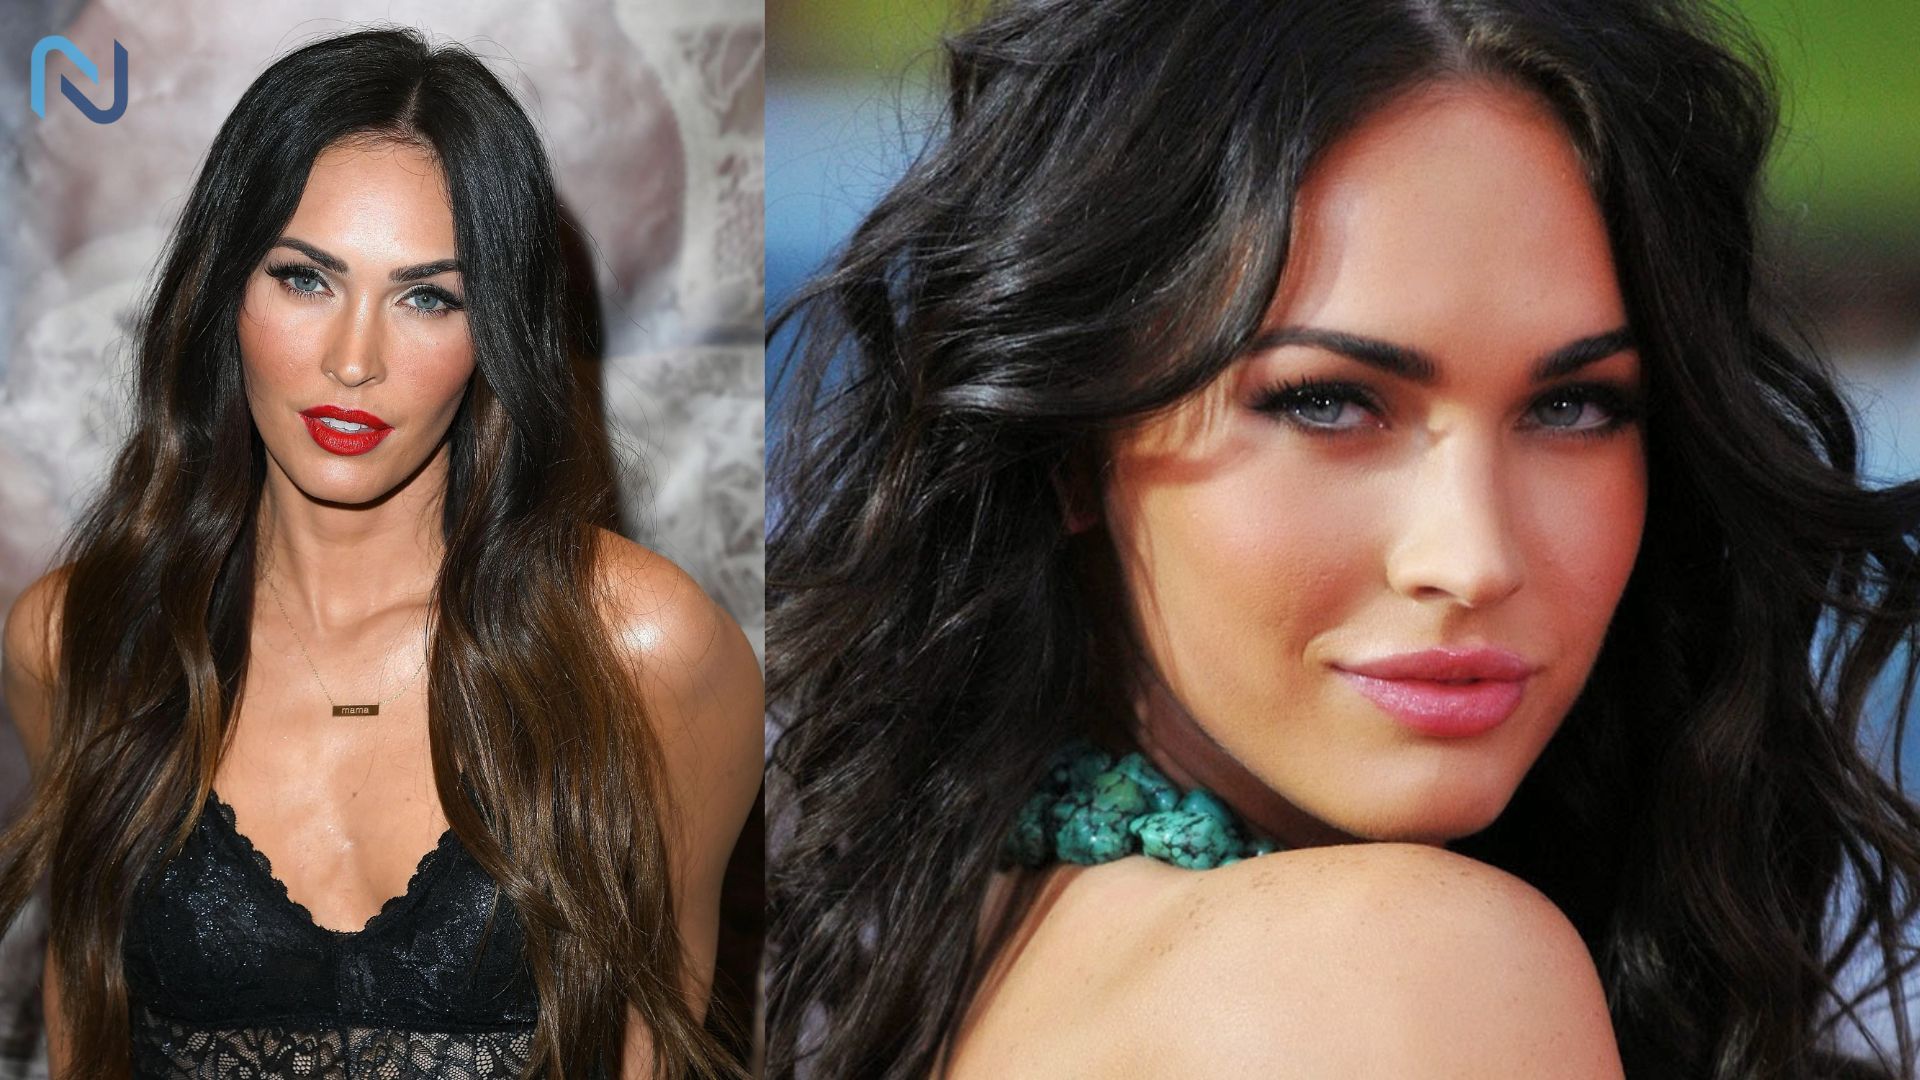 Megan fox Hottest and Most Beautiful American Actress